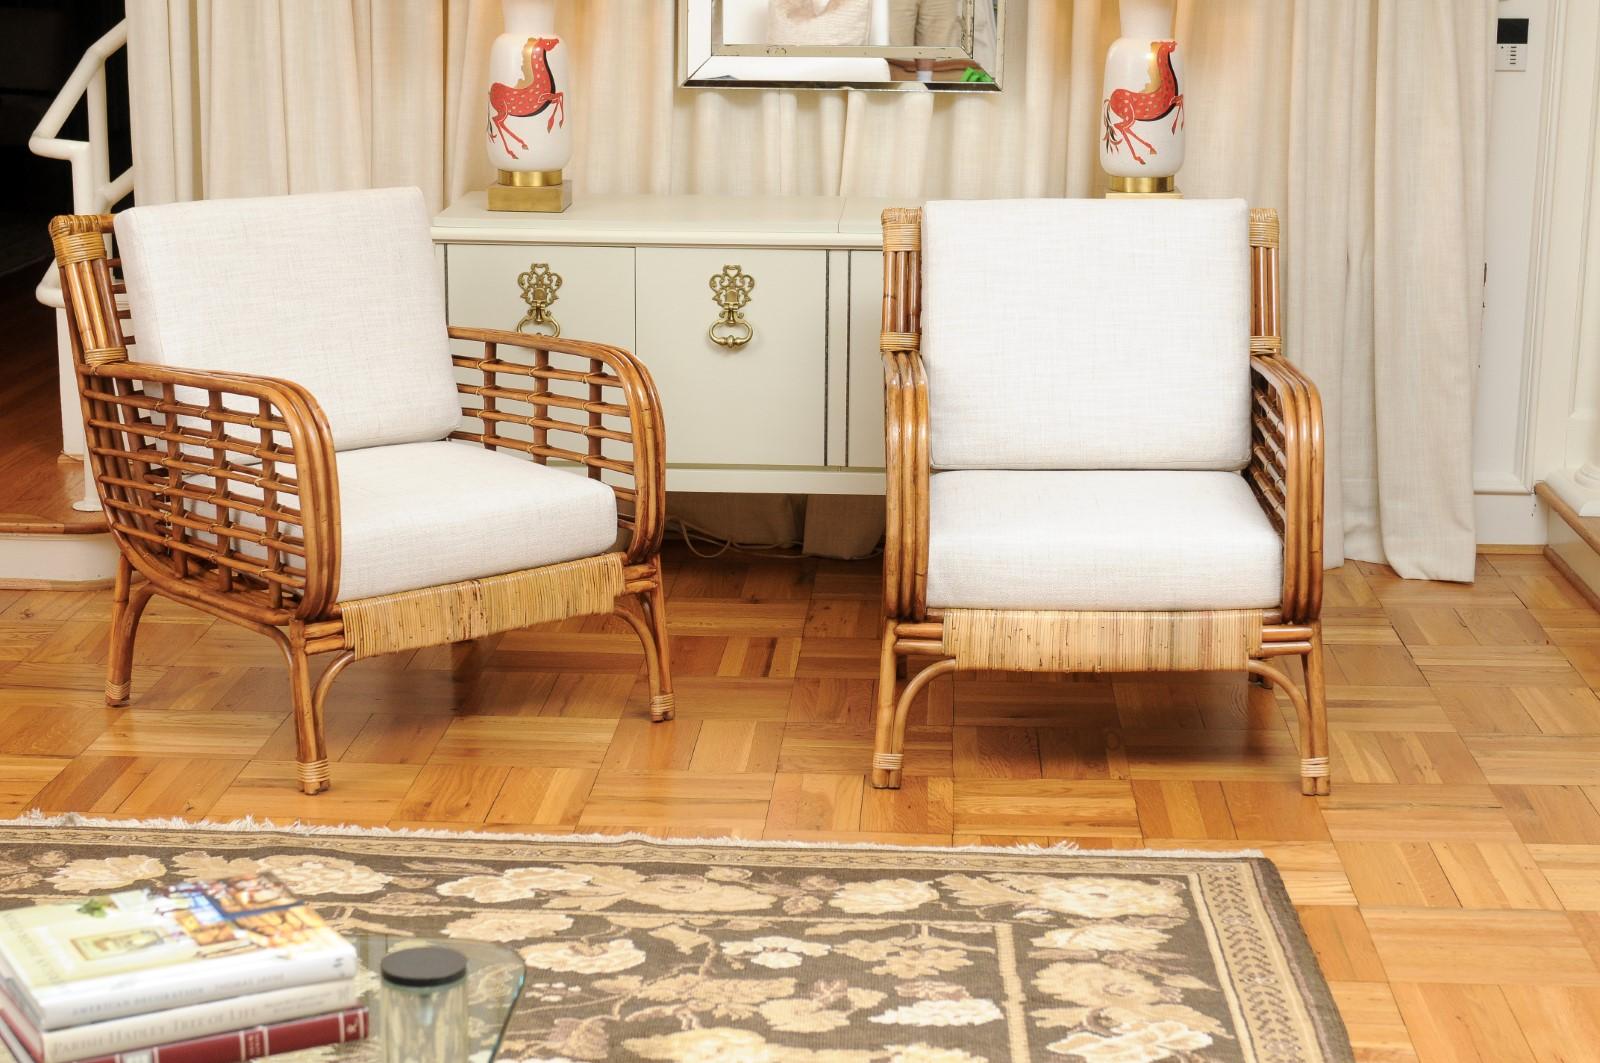 These magnificent lounge chairs are shipped as professionally photographed and described in the listing narrative: Meticulously professionally restored and installation ready. Expert custom upholstery service is available.

A fabulous pair of